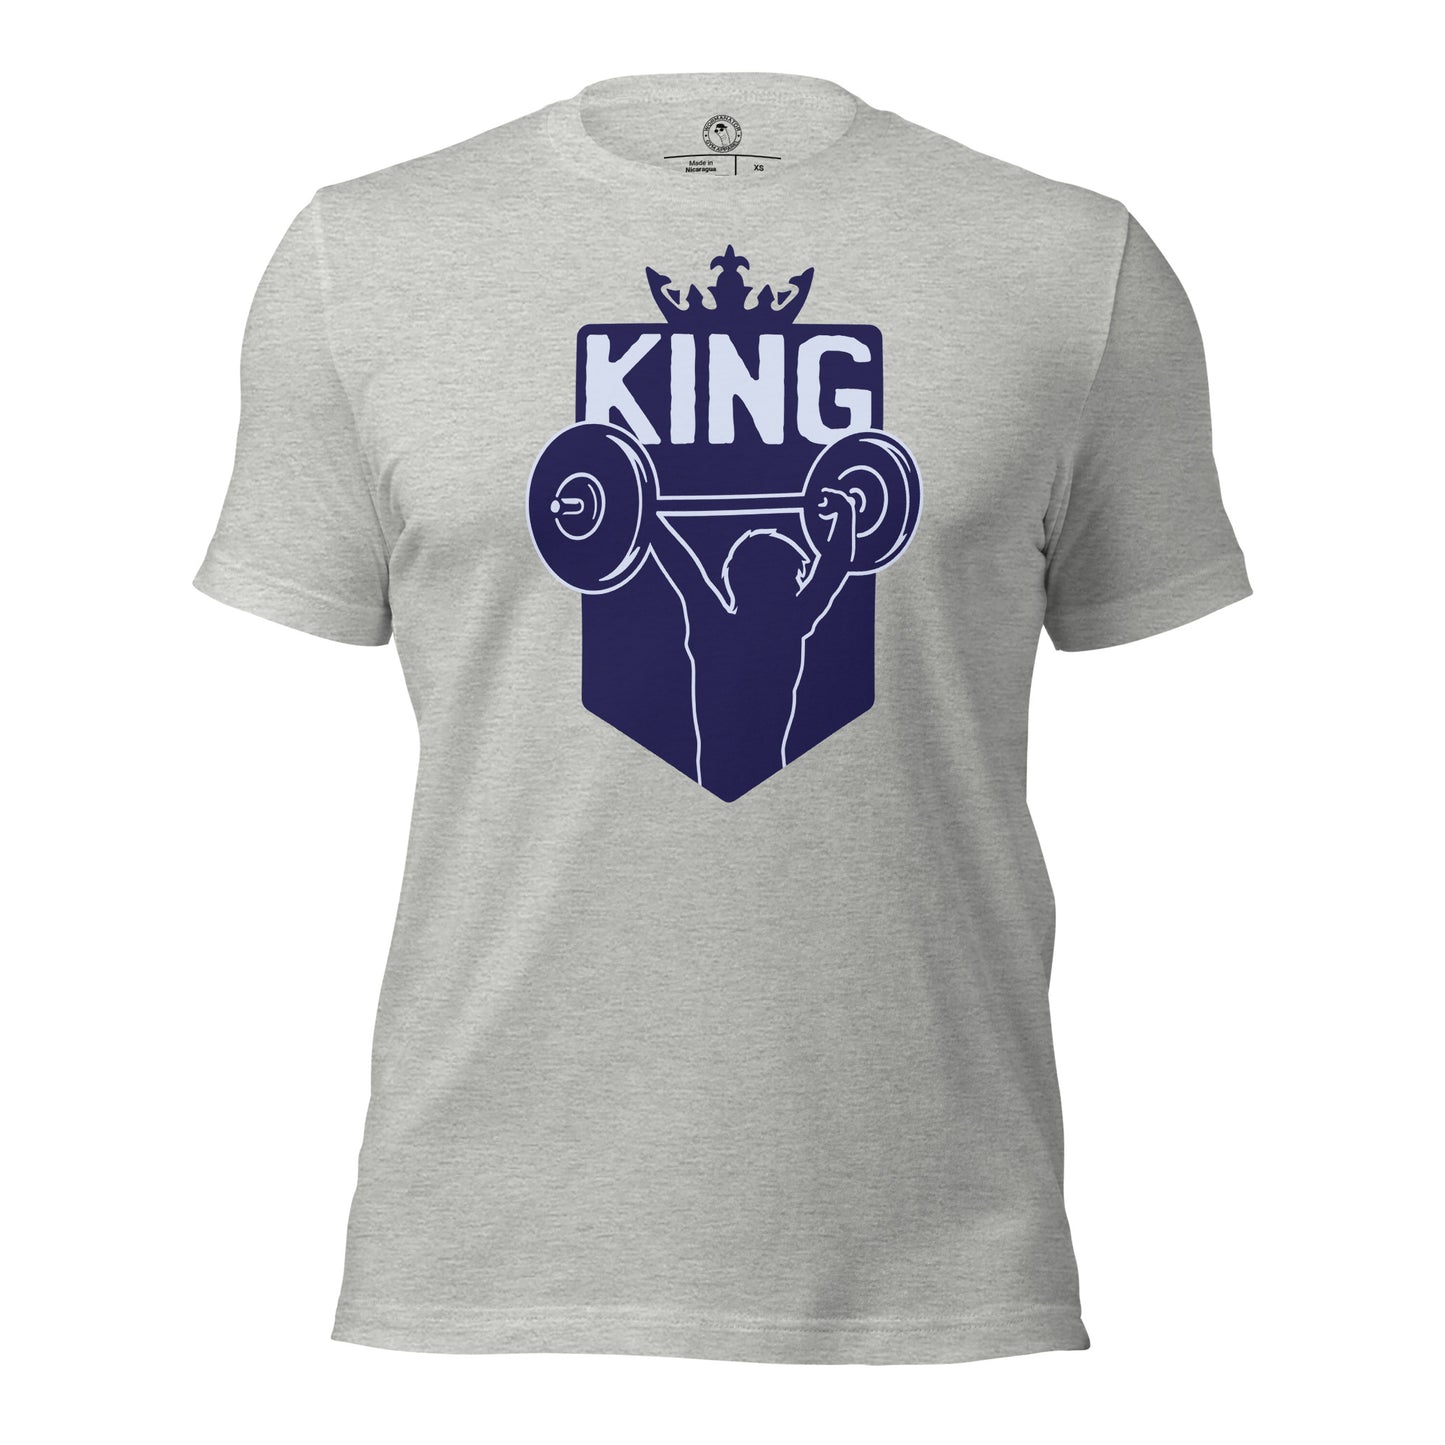 Gym King Shirt in Athletic Heather